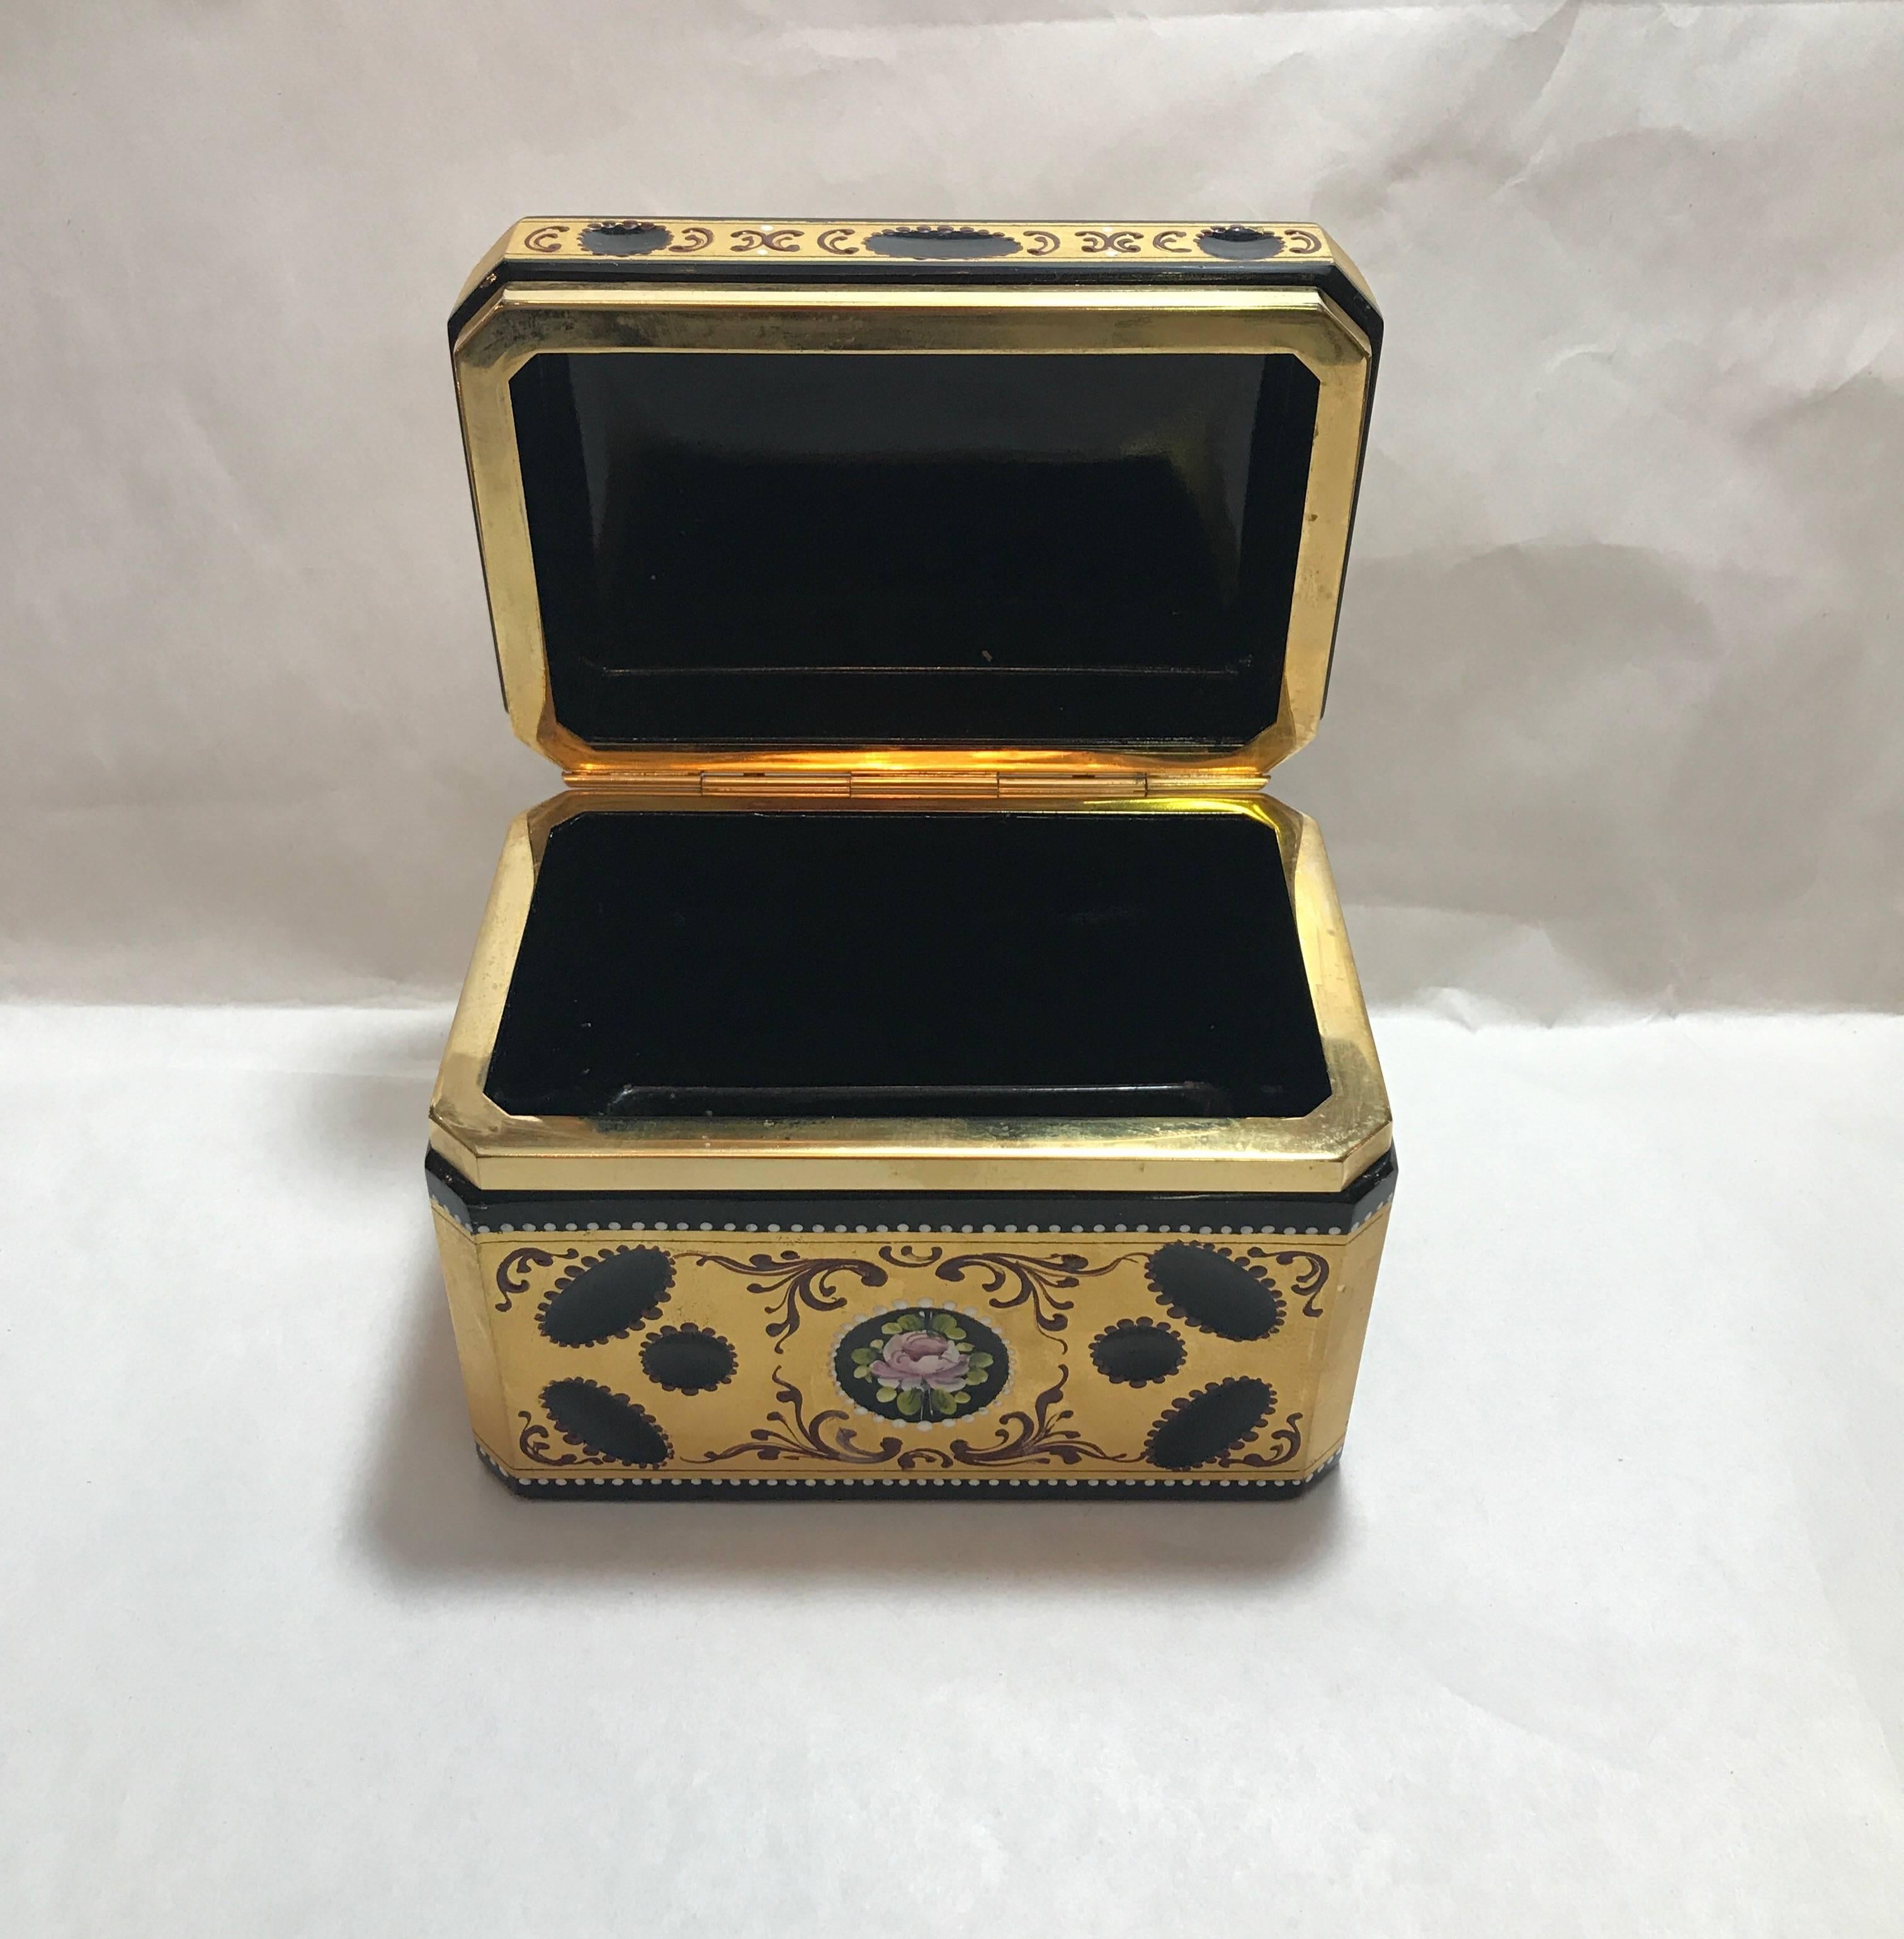 Gilt Antique 19th Century Gold Encrusted and Hand Enameled Hinged Glass Table Box